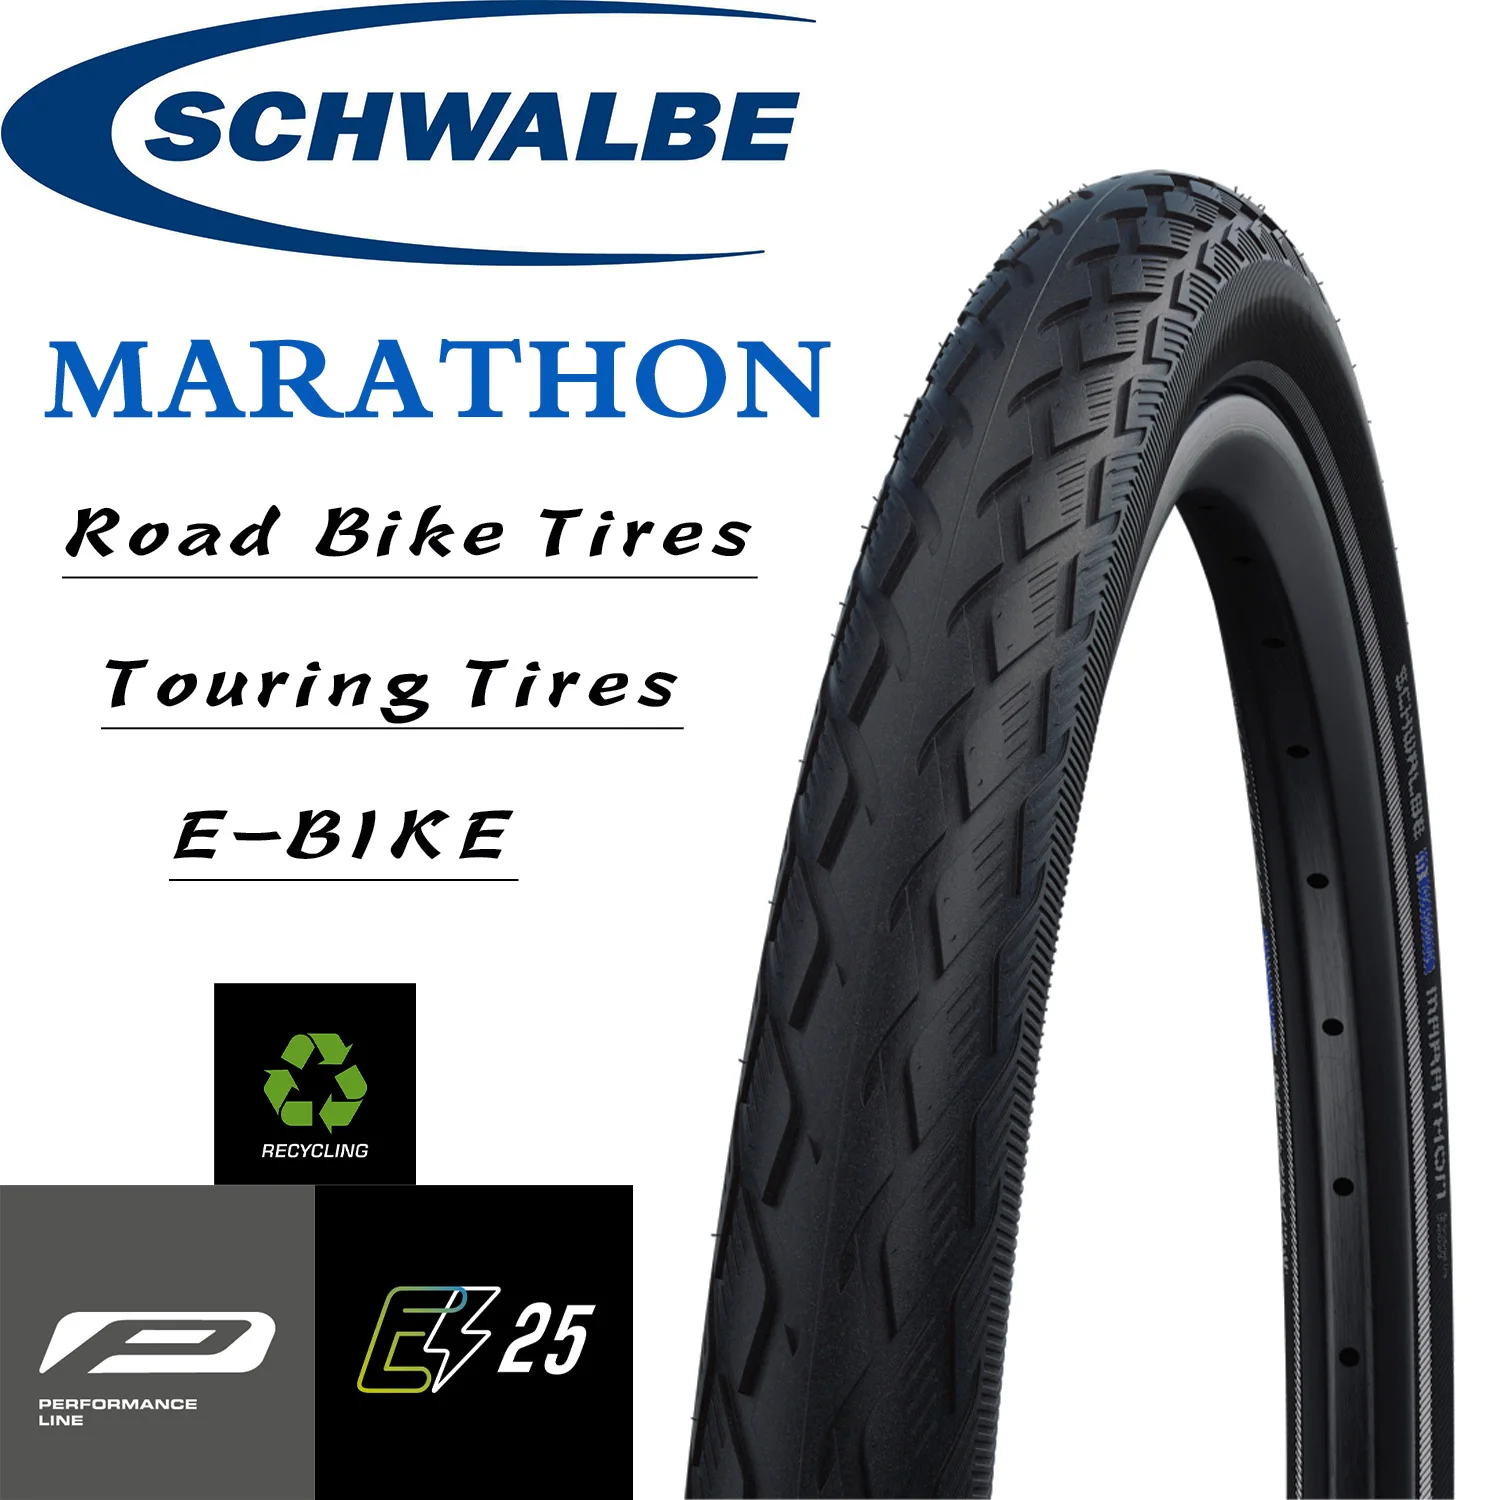 Recycled bike tires have arrived with the Schwalbe Green Marathon